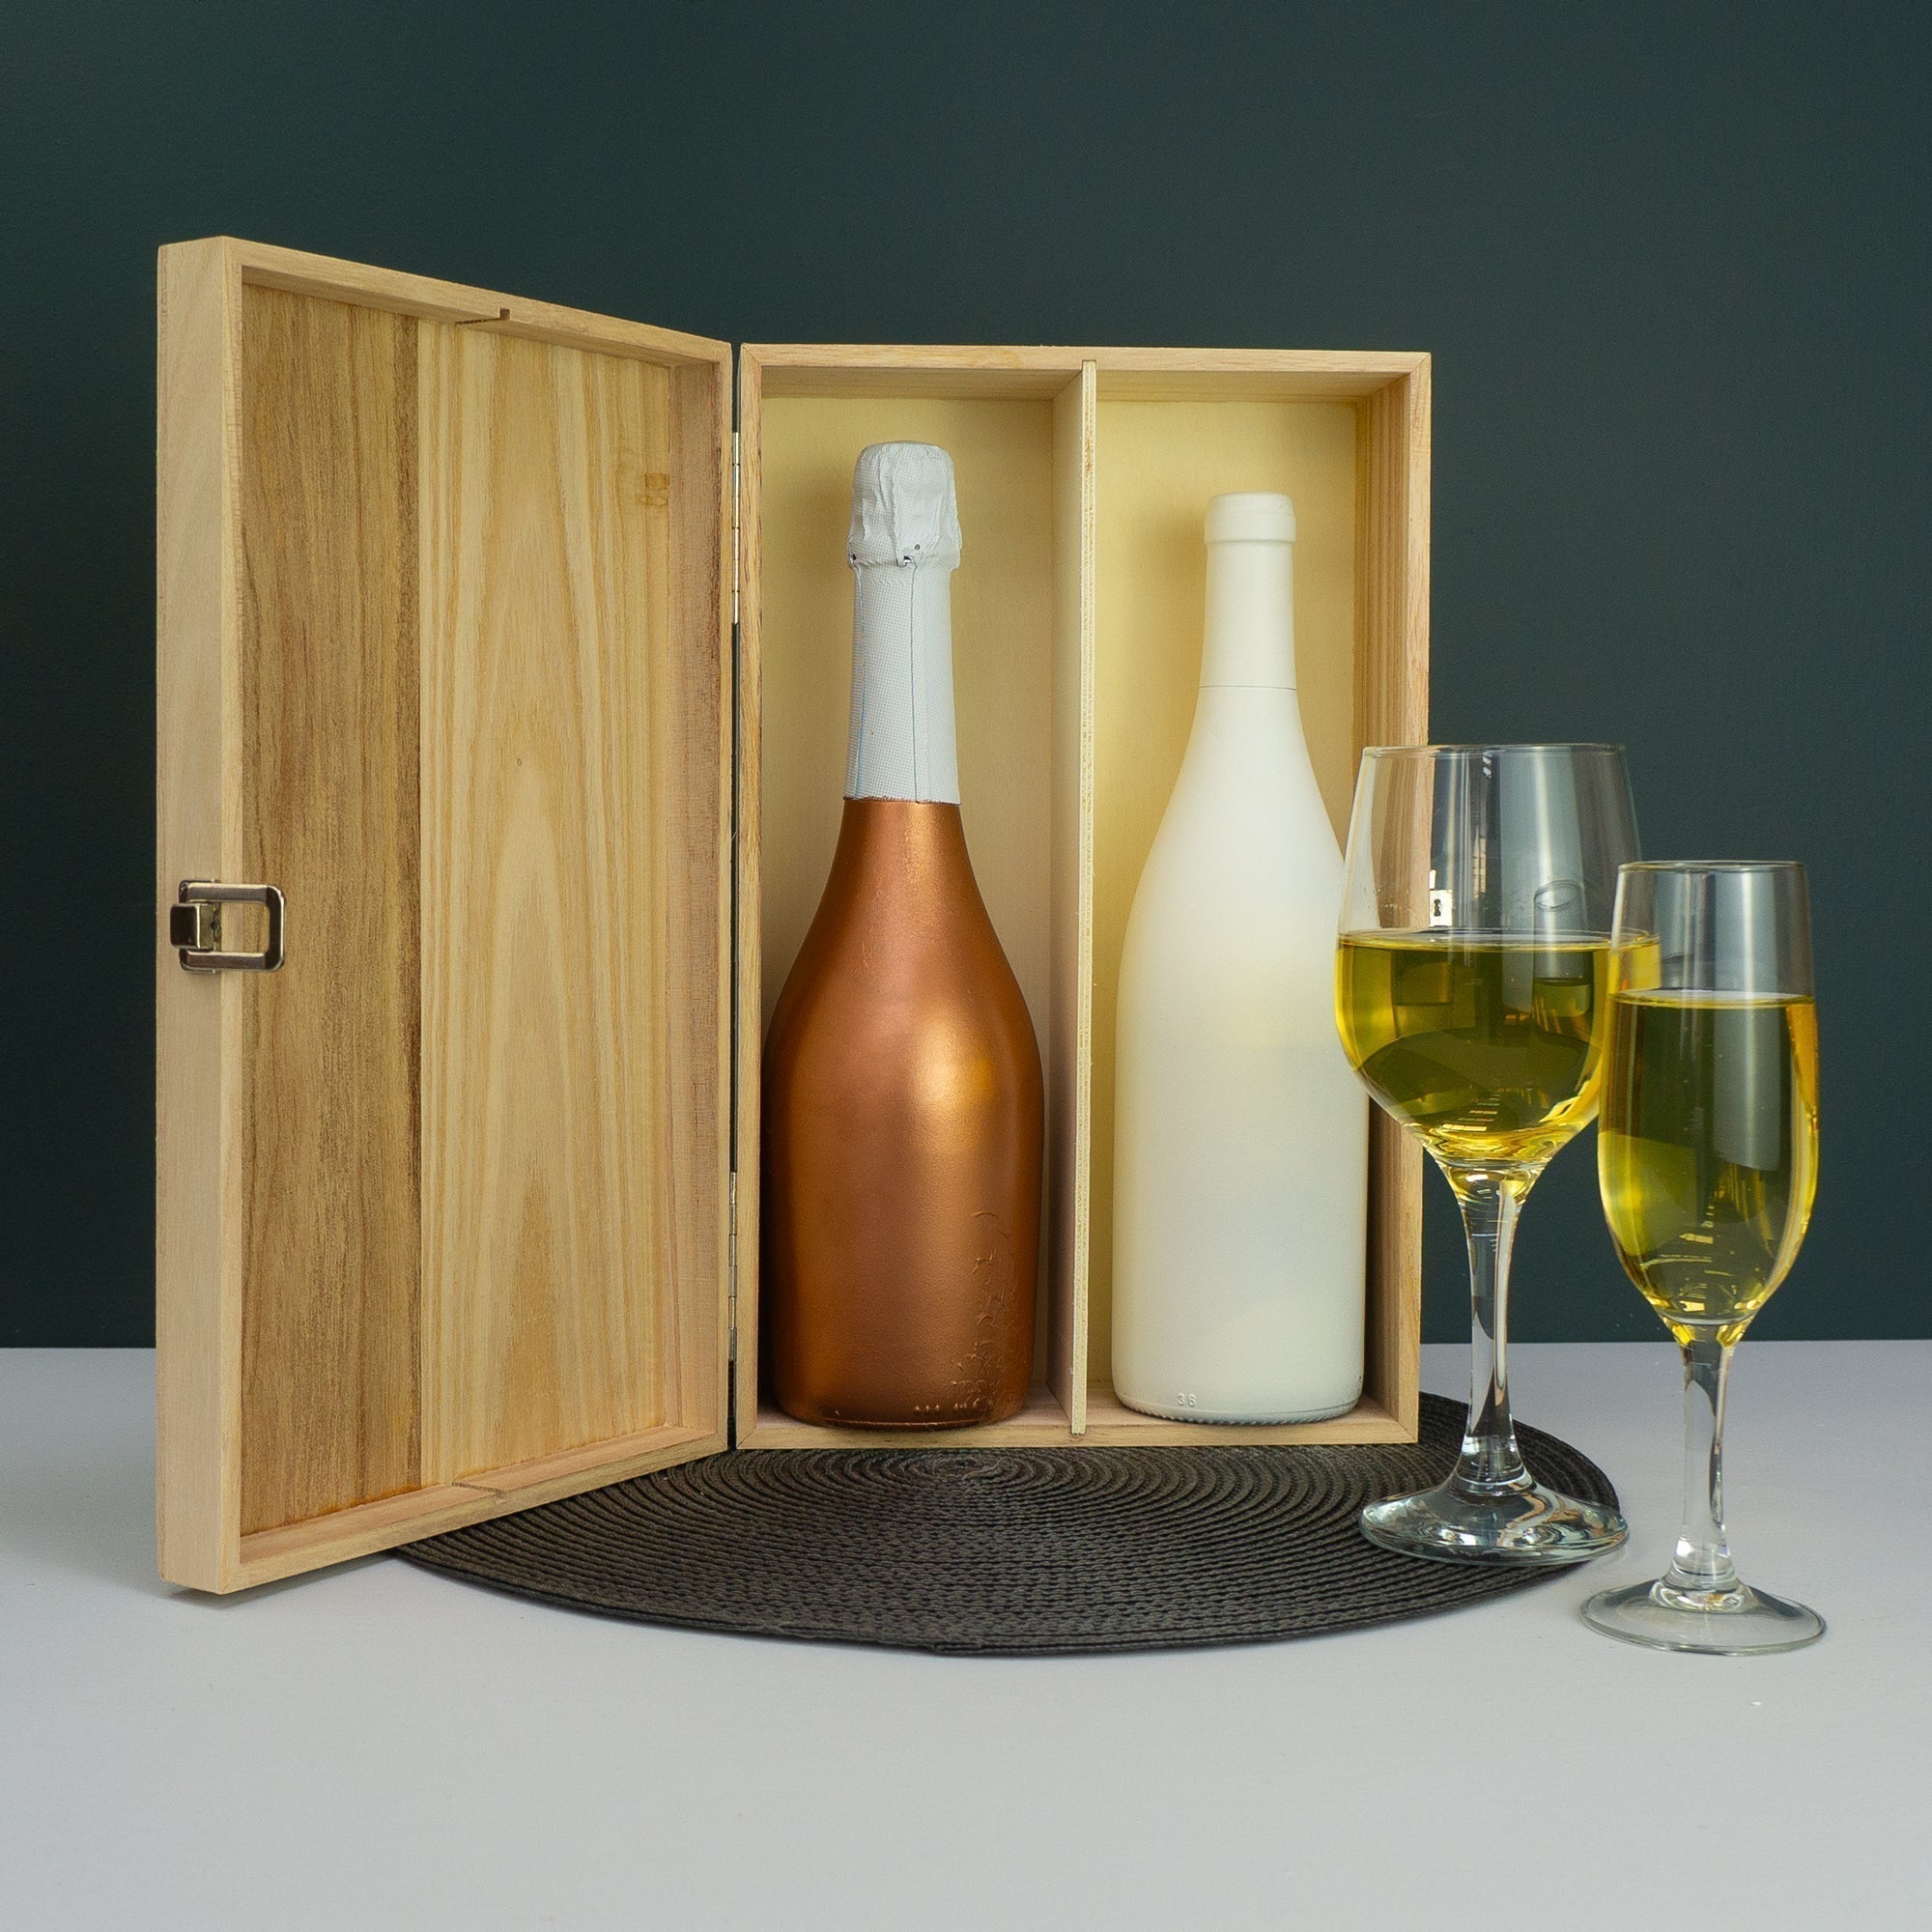 Personalised retirement present. Twin bottle gifting box